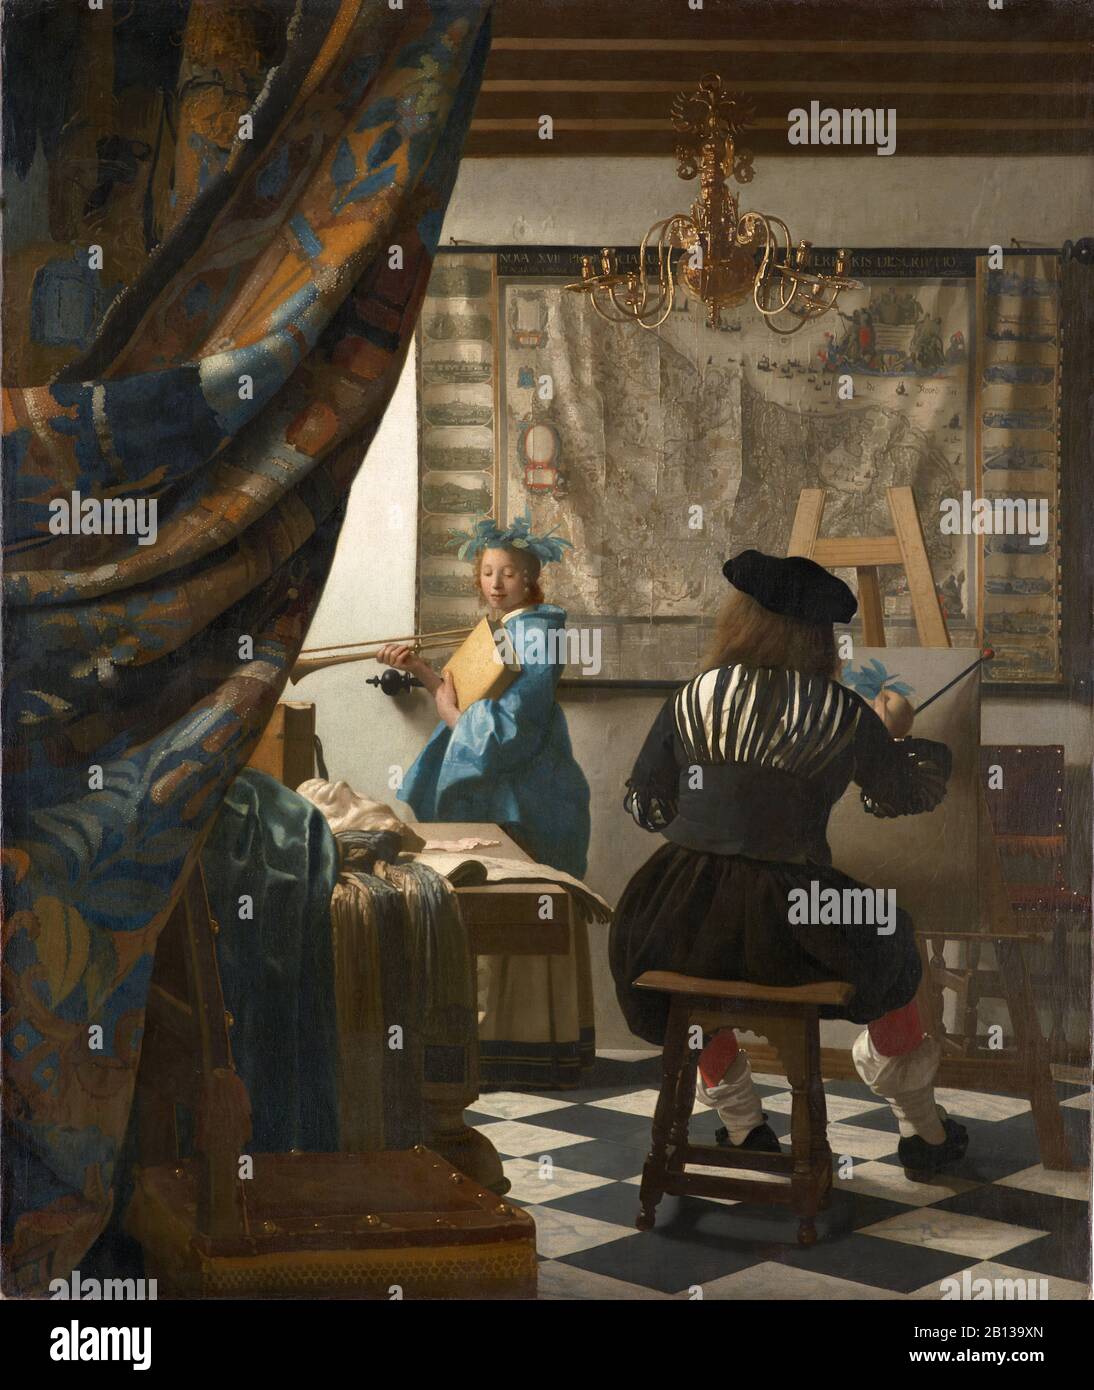 The Art of Painting (circa 1667) by Johannes Vermeer - 17th Century Dutch Baroque Period Painting Stock Photo